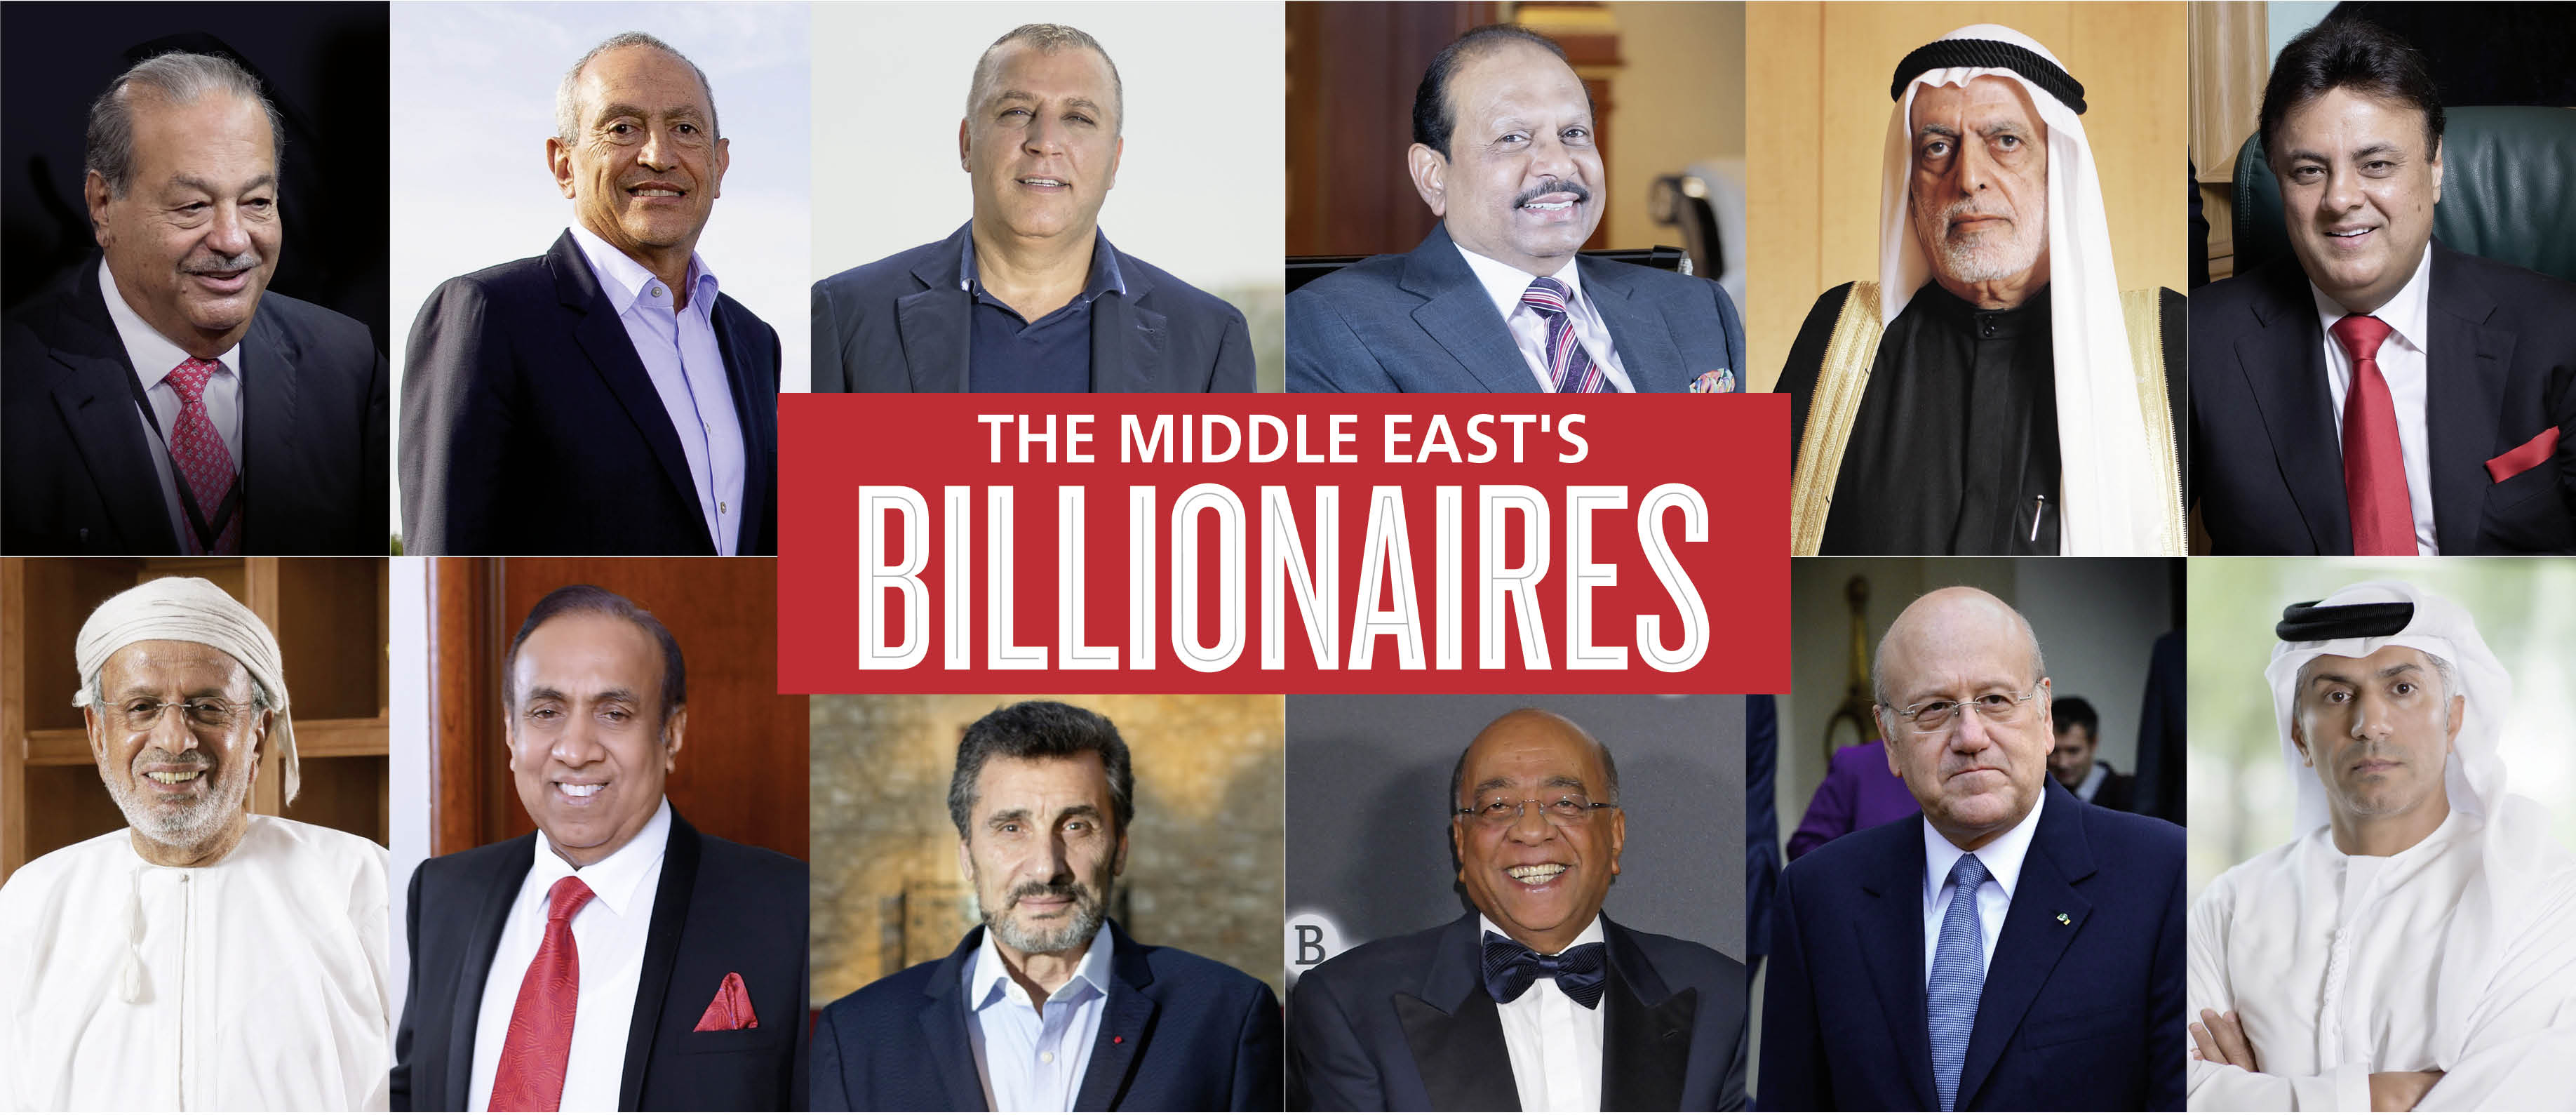 THE MIDDLE EAST'S BILLIONAIRES 2019